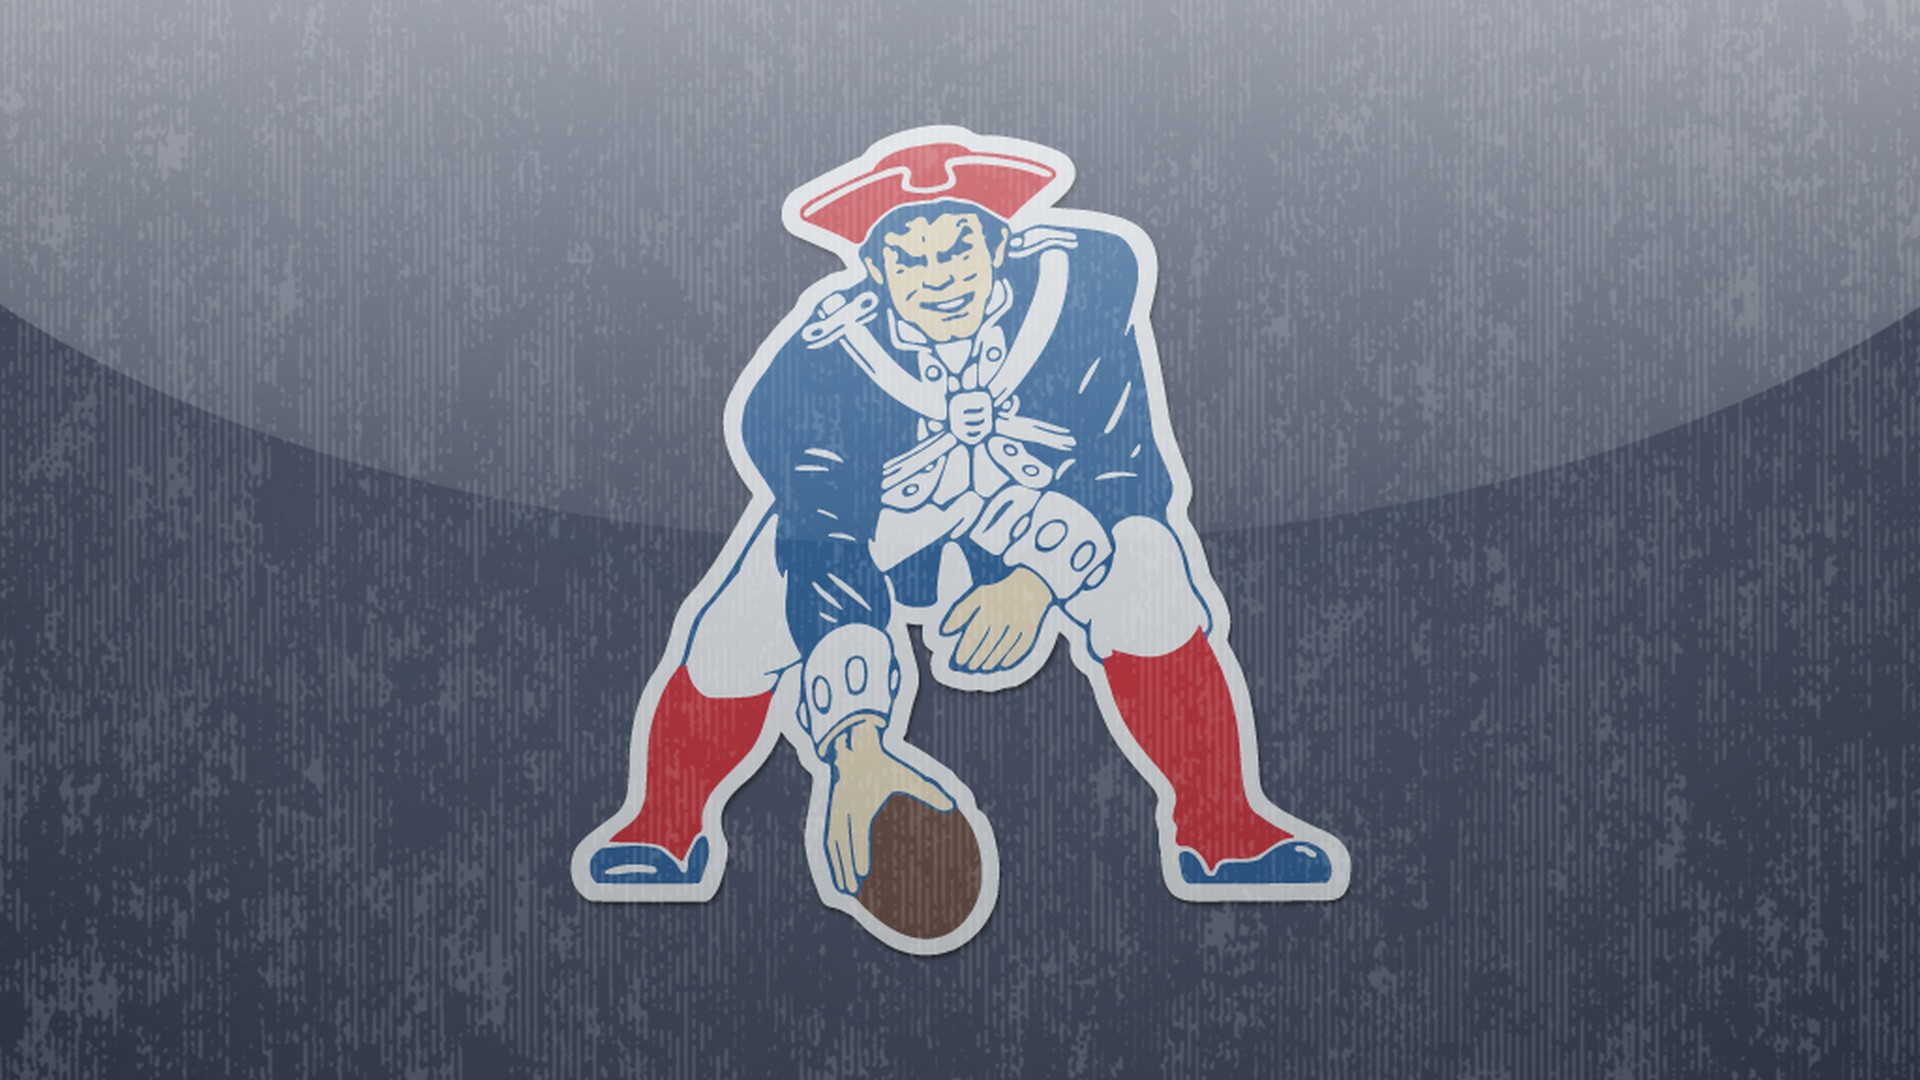 New England Patriots Wallpaper For Mac With Resolution 1920X1080 pixel. You can make this wallpaper for your Mac or Windows Desktop Background, iPhone, Android or Tablet and another Smartphone device for free